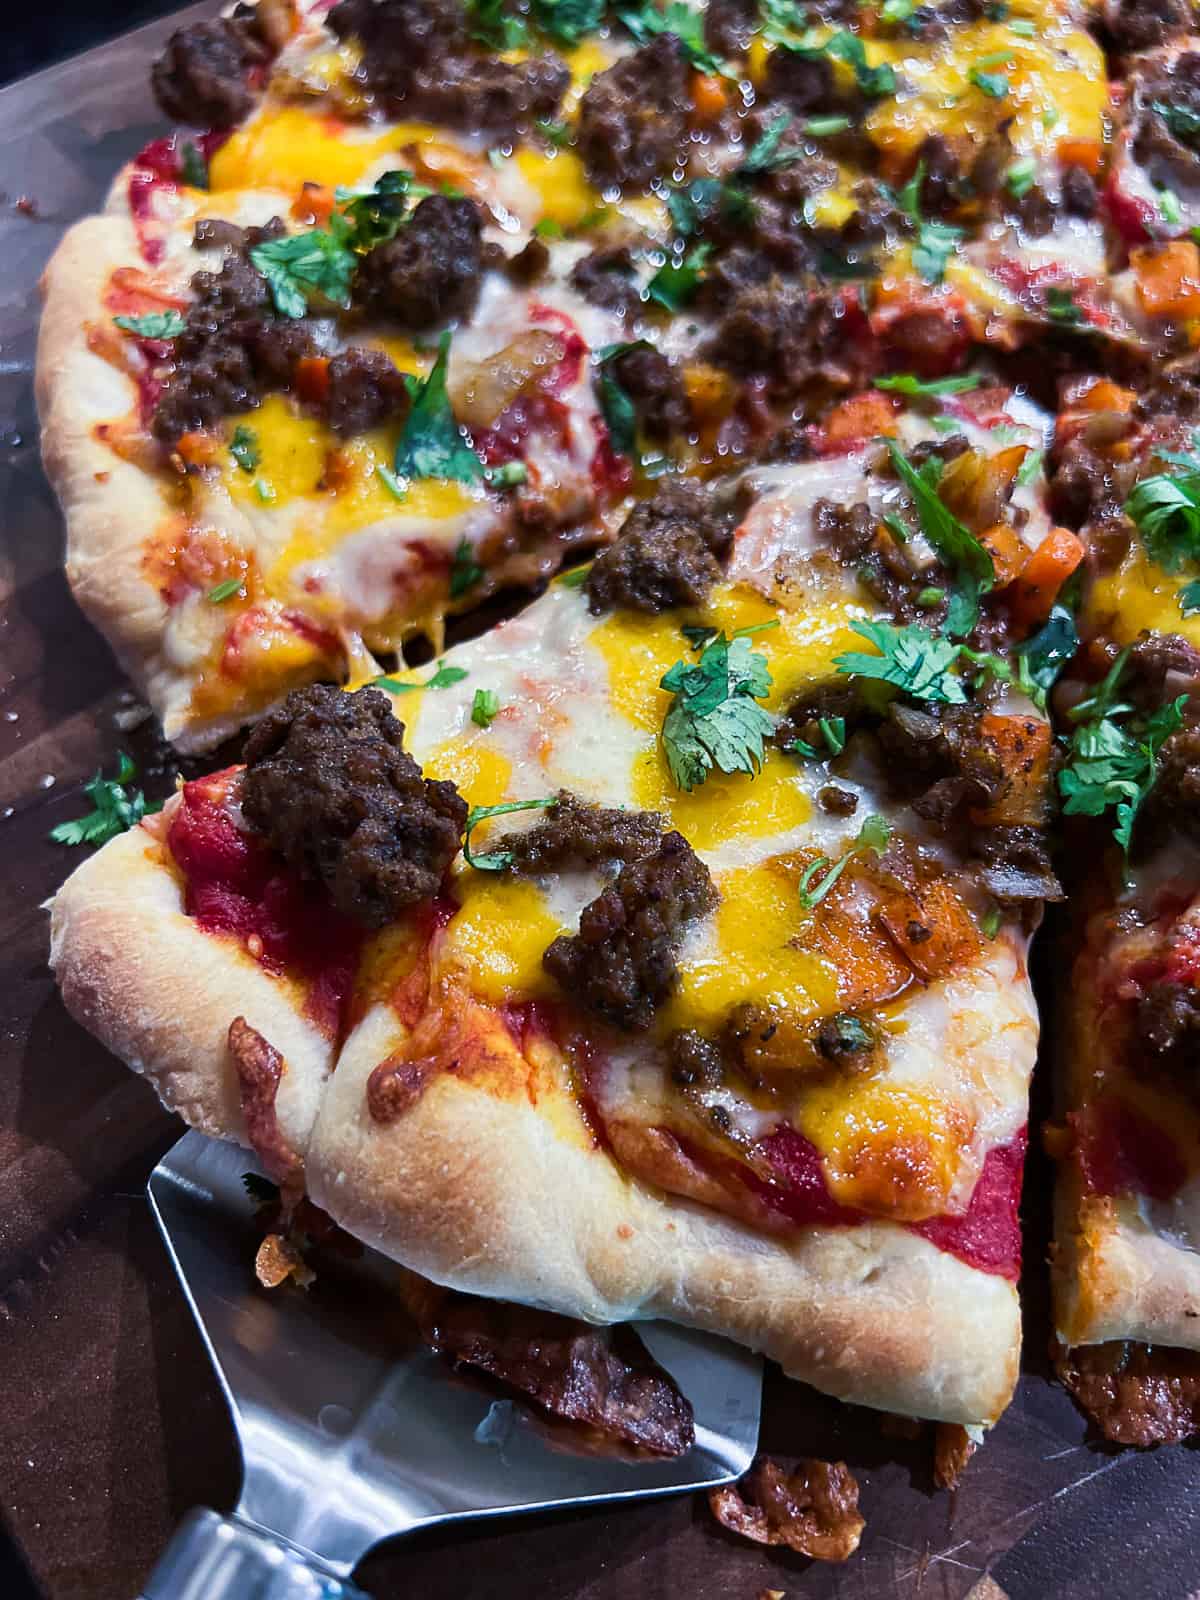 Ground beef and vegetables recipe on pizza as leftovers